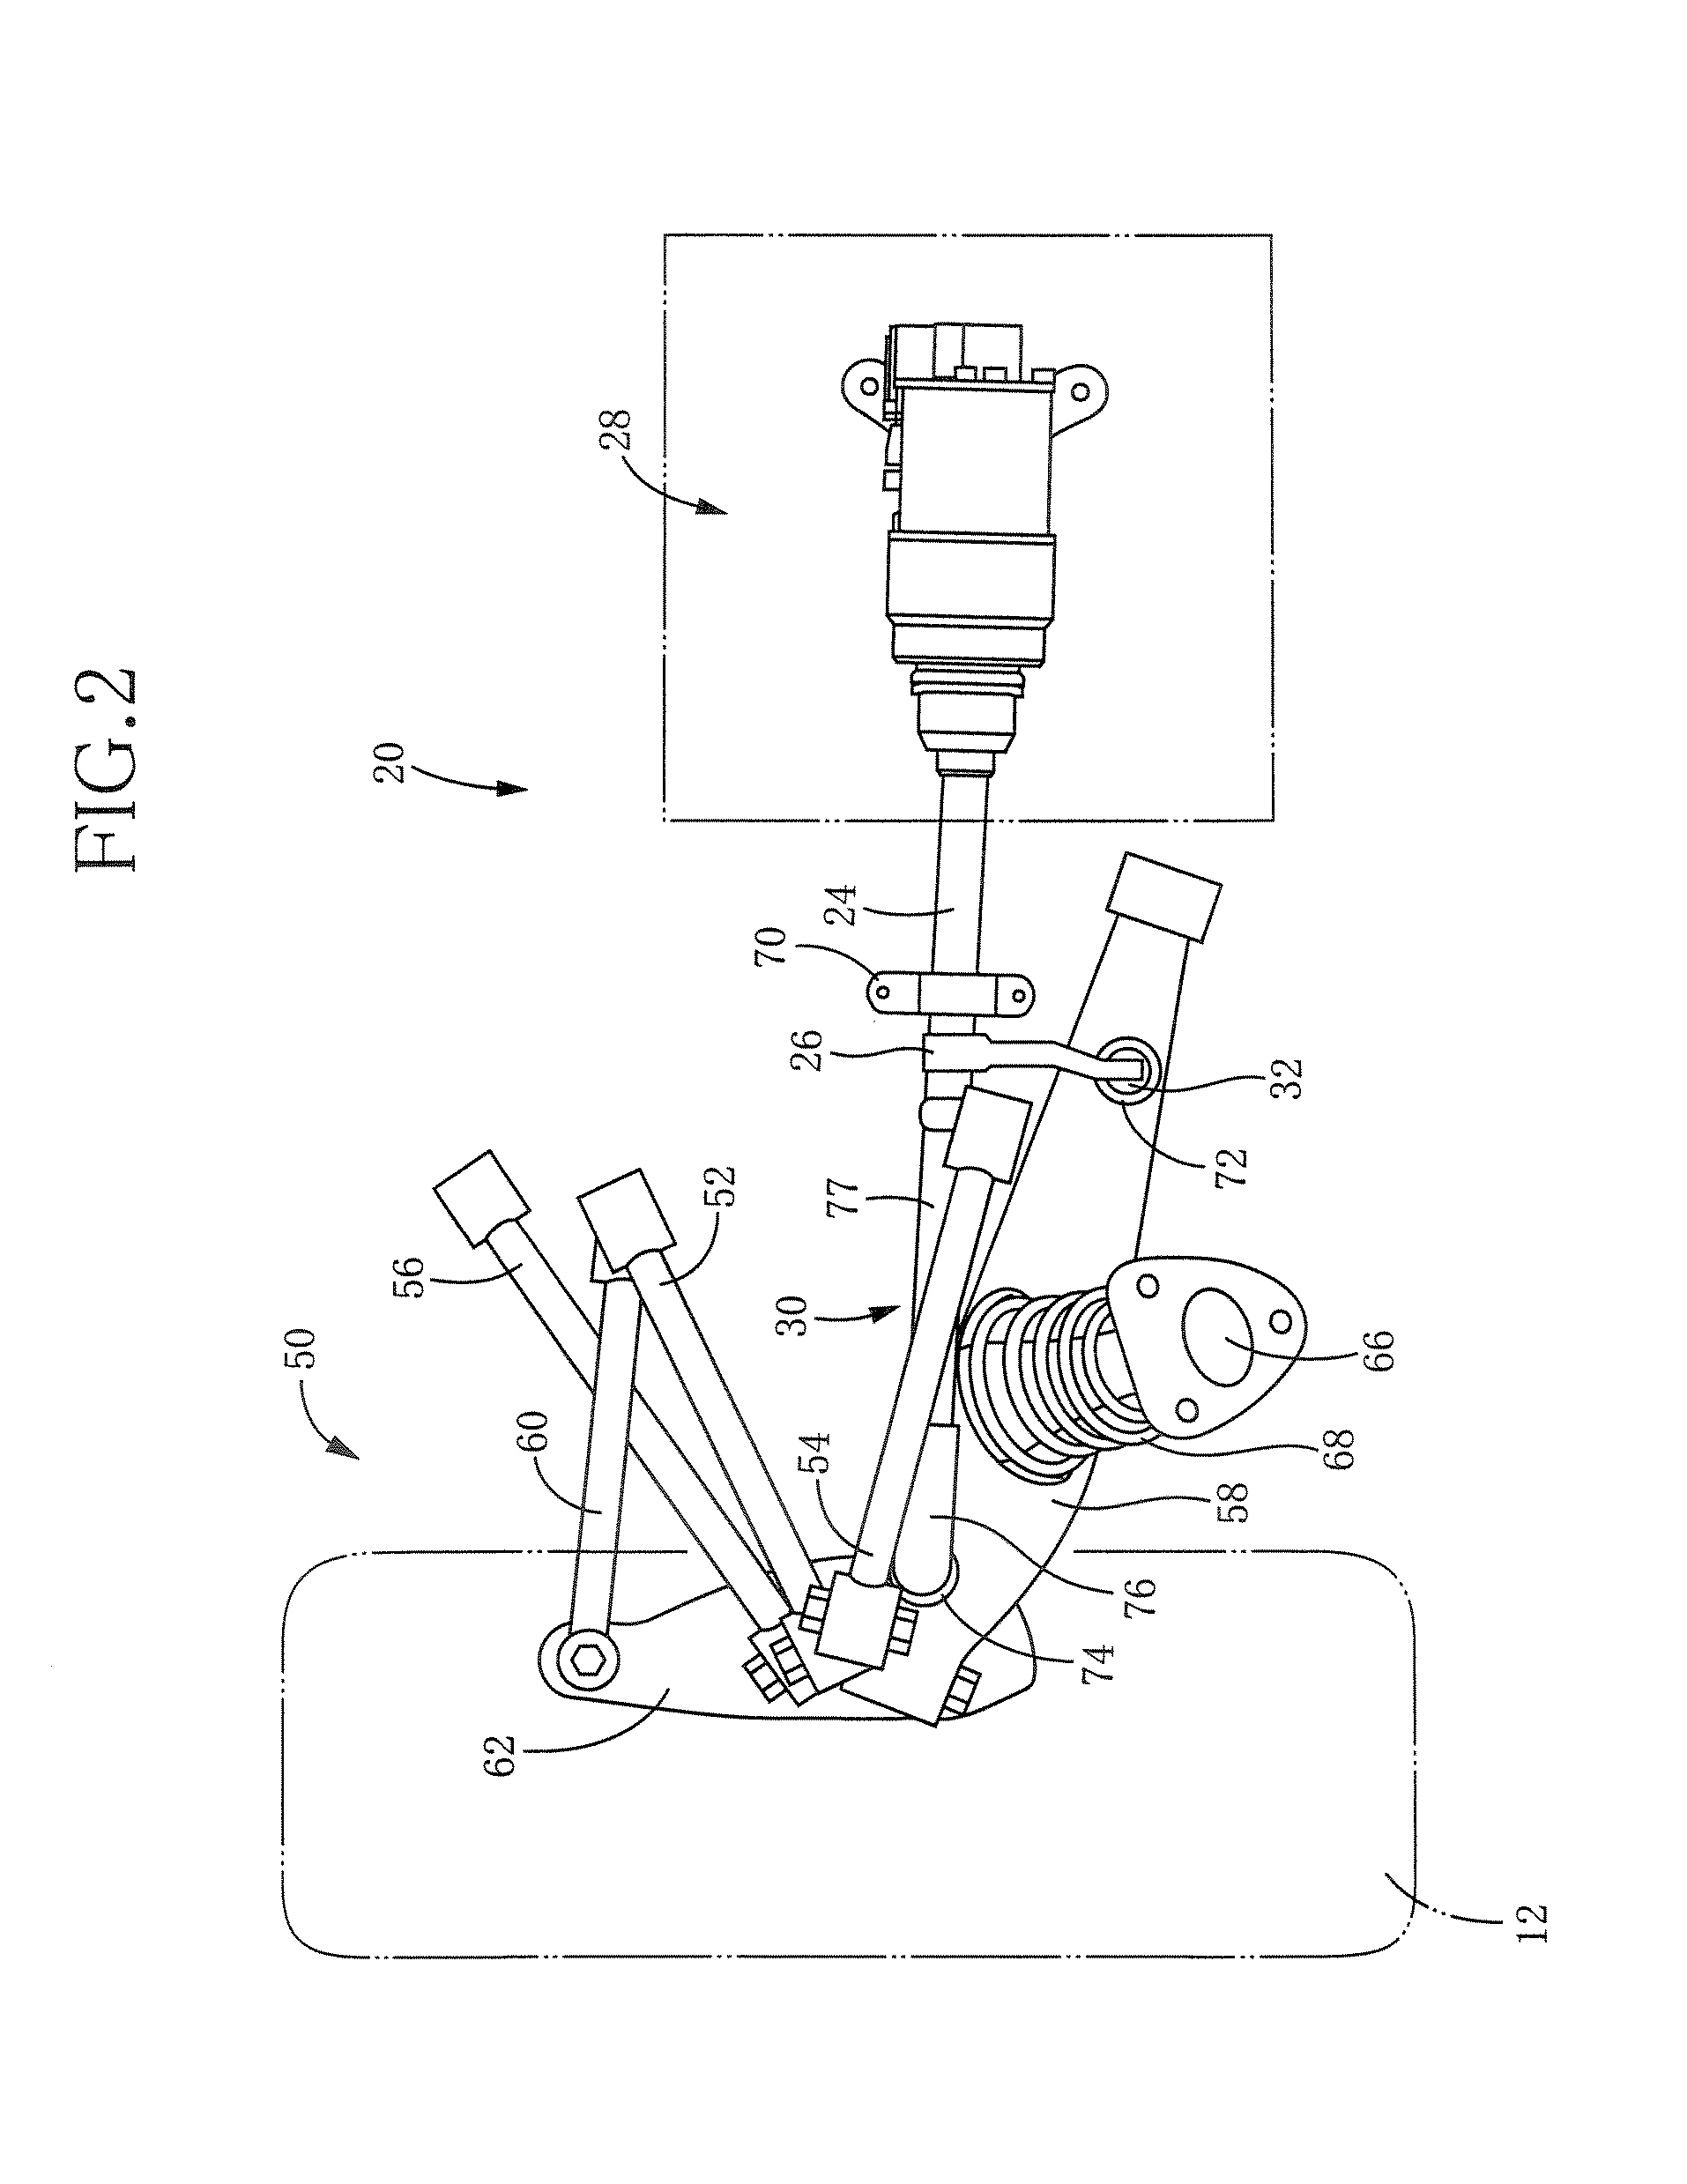 Device for changing distance between wheel and vehicle body, and system including the device